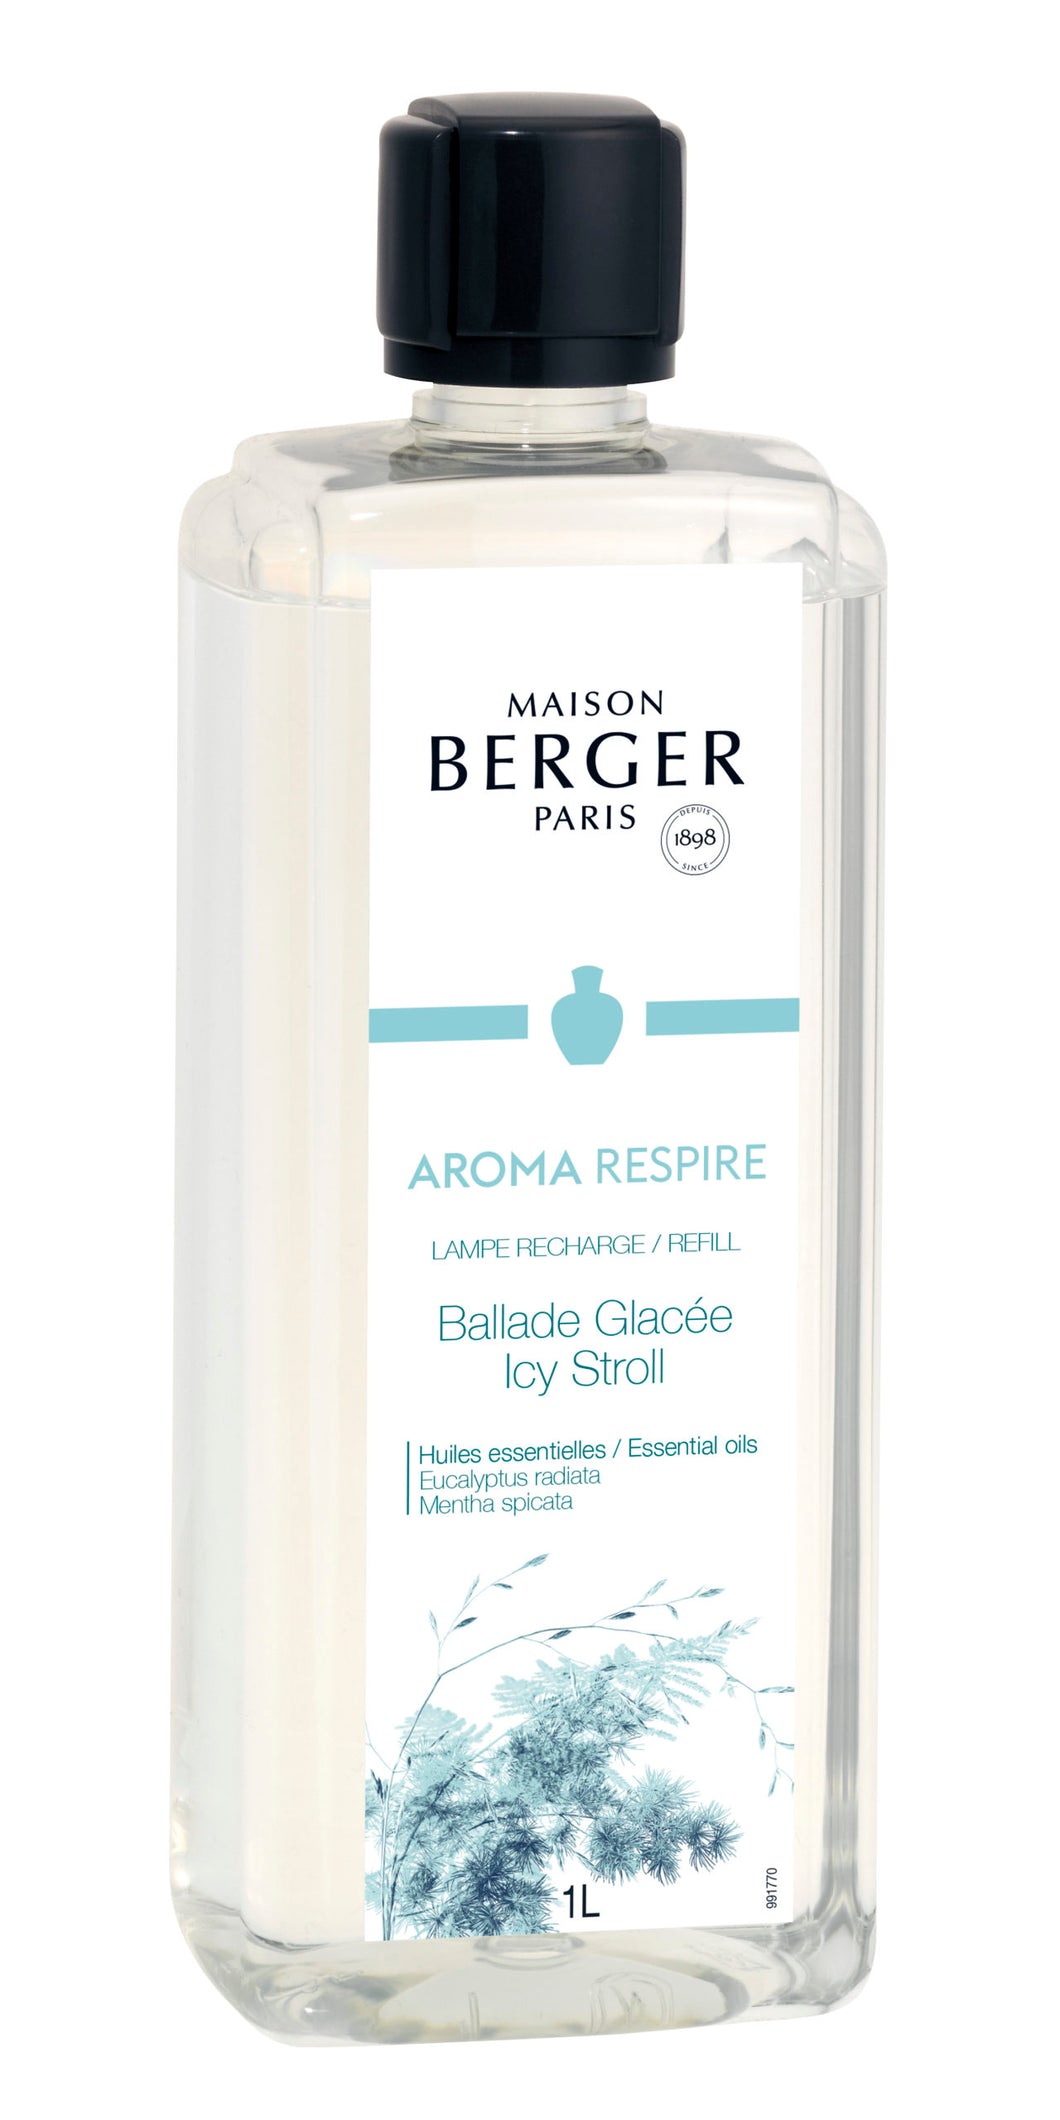 Maison Berger Icy Stroll Aroma Respire 1L